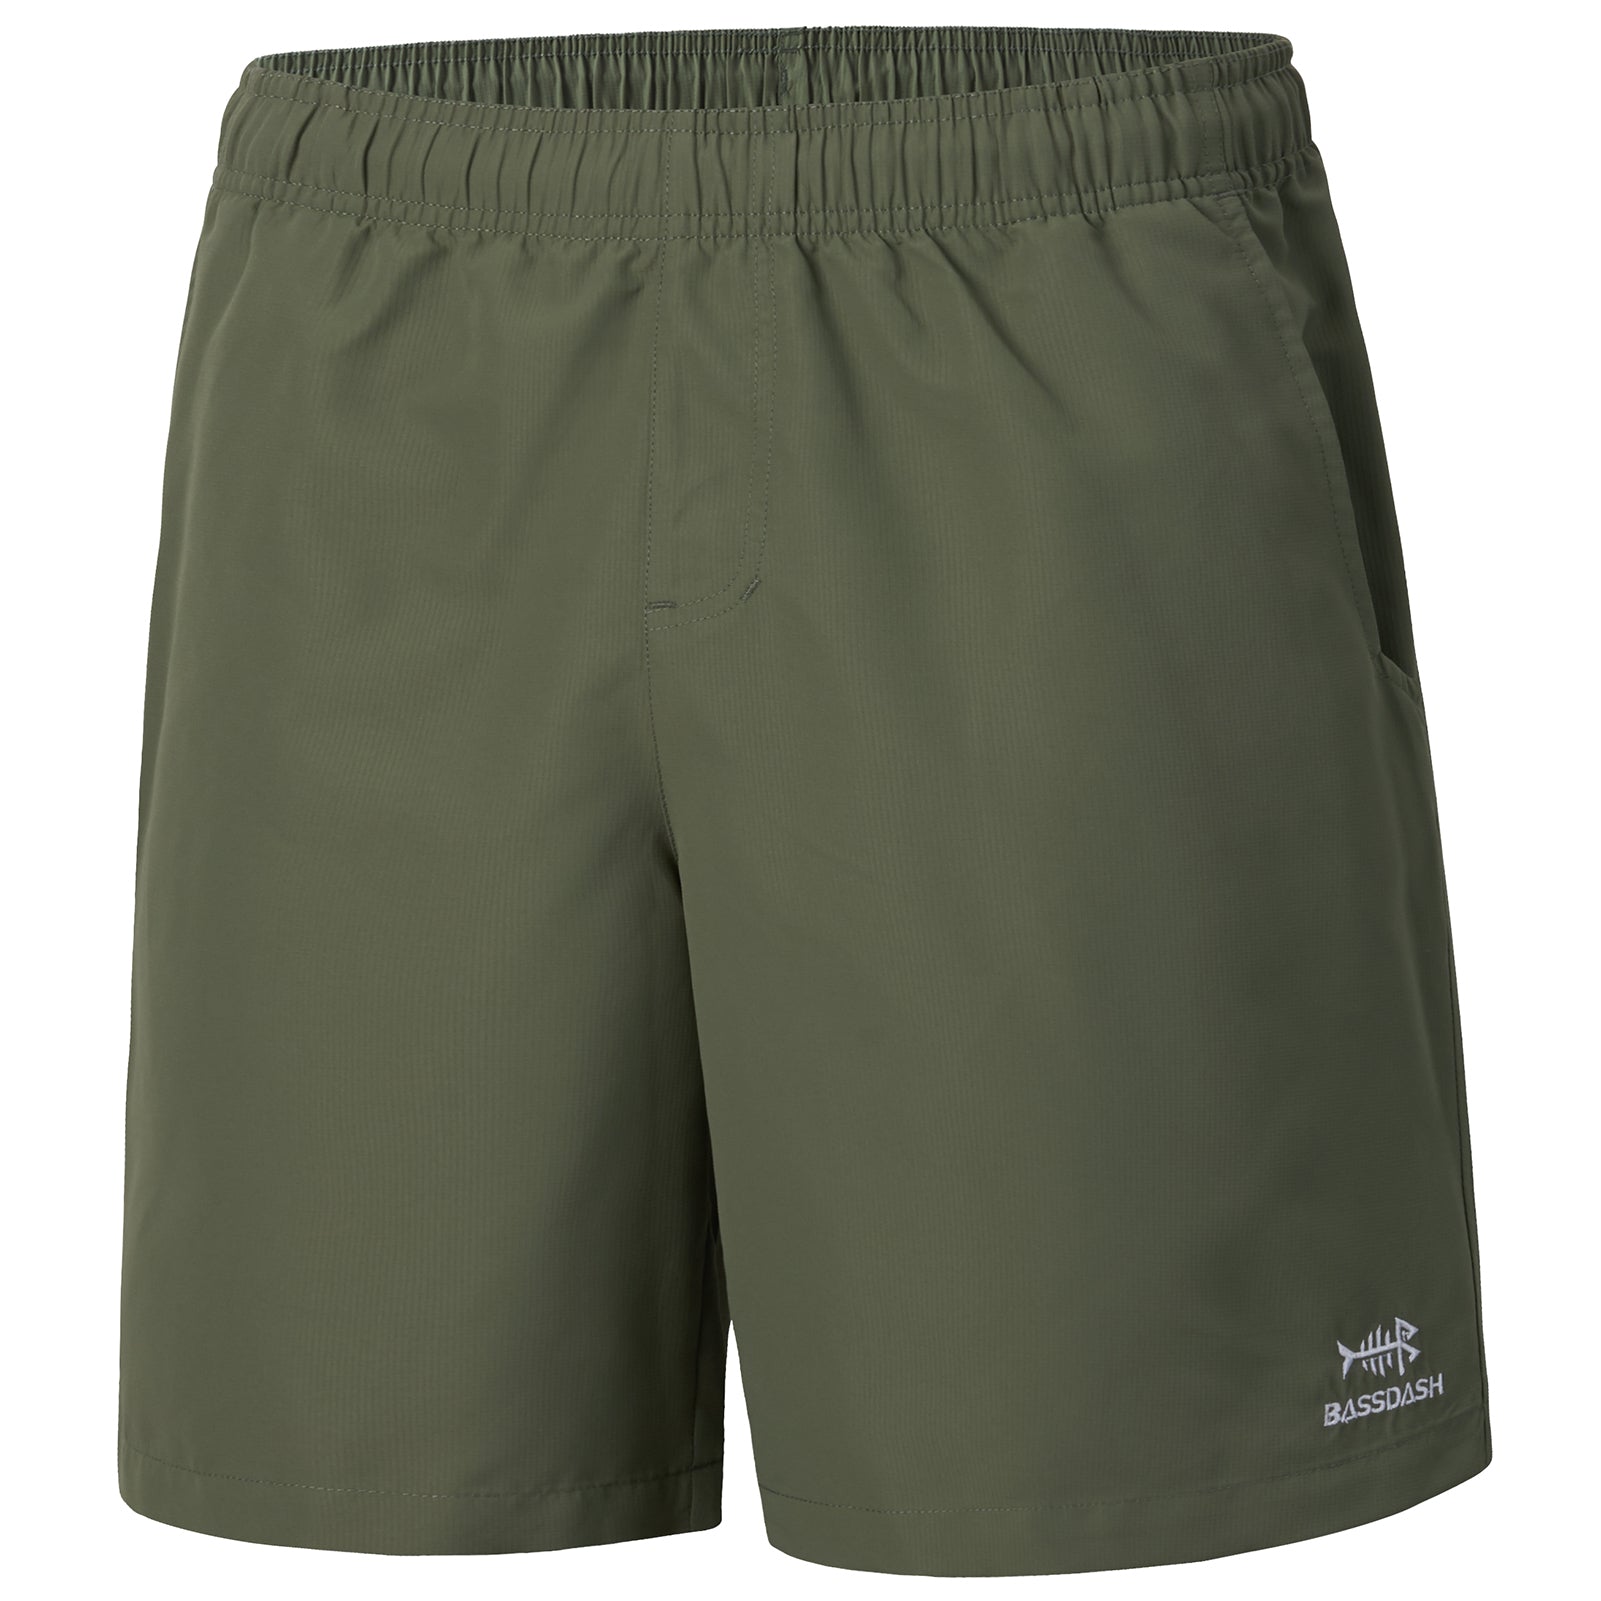 Men's 8in Quick Dry UPF 50+ Water Shorts FP04M, Cypress / Small